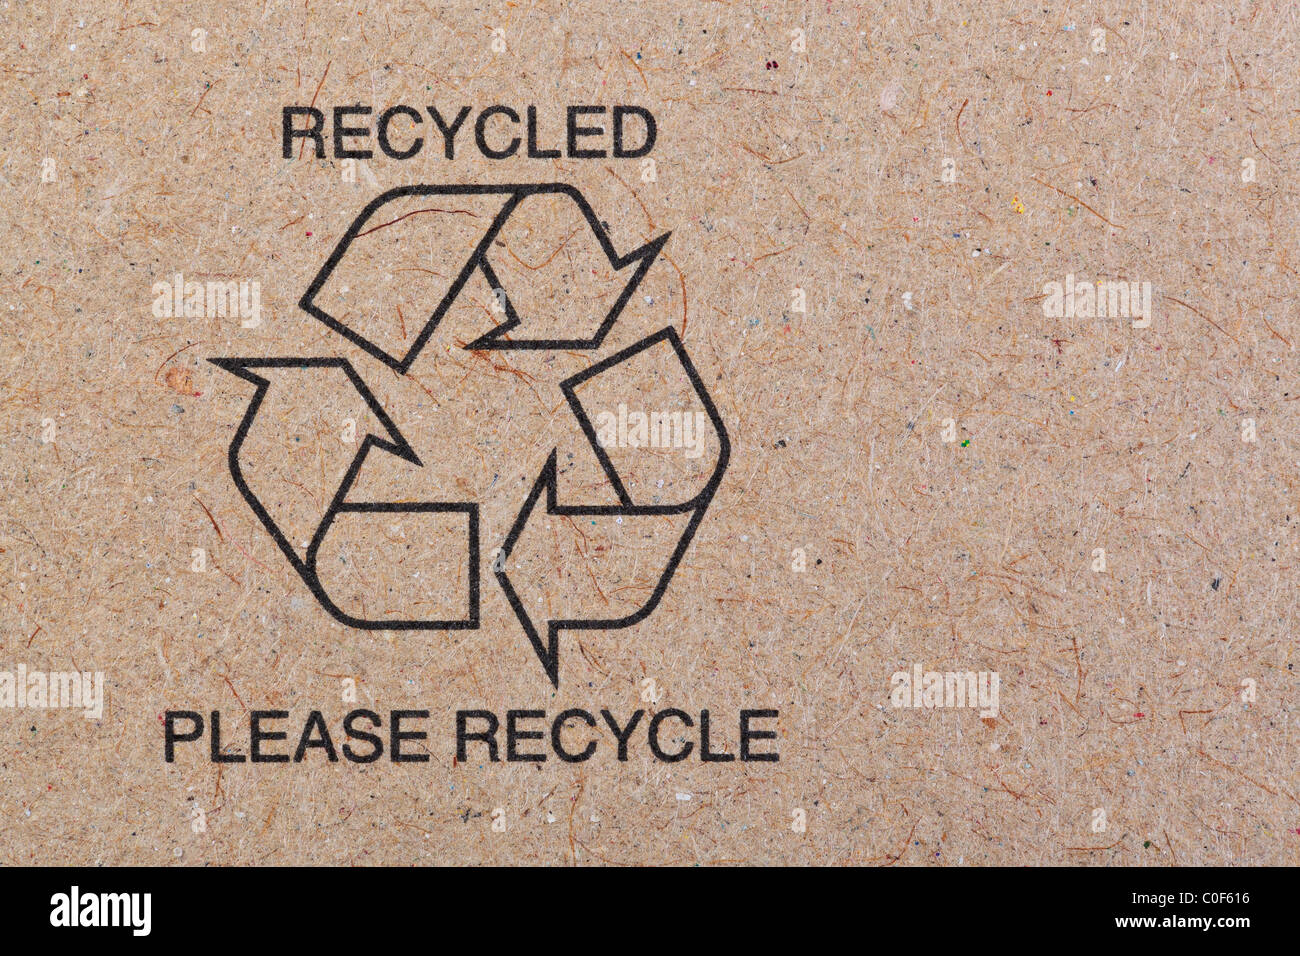 Close up photo of the recycle symbol printed on a recycled cardboard background. Stock Photo